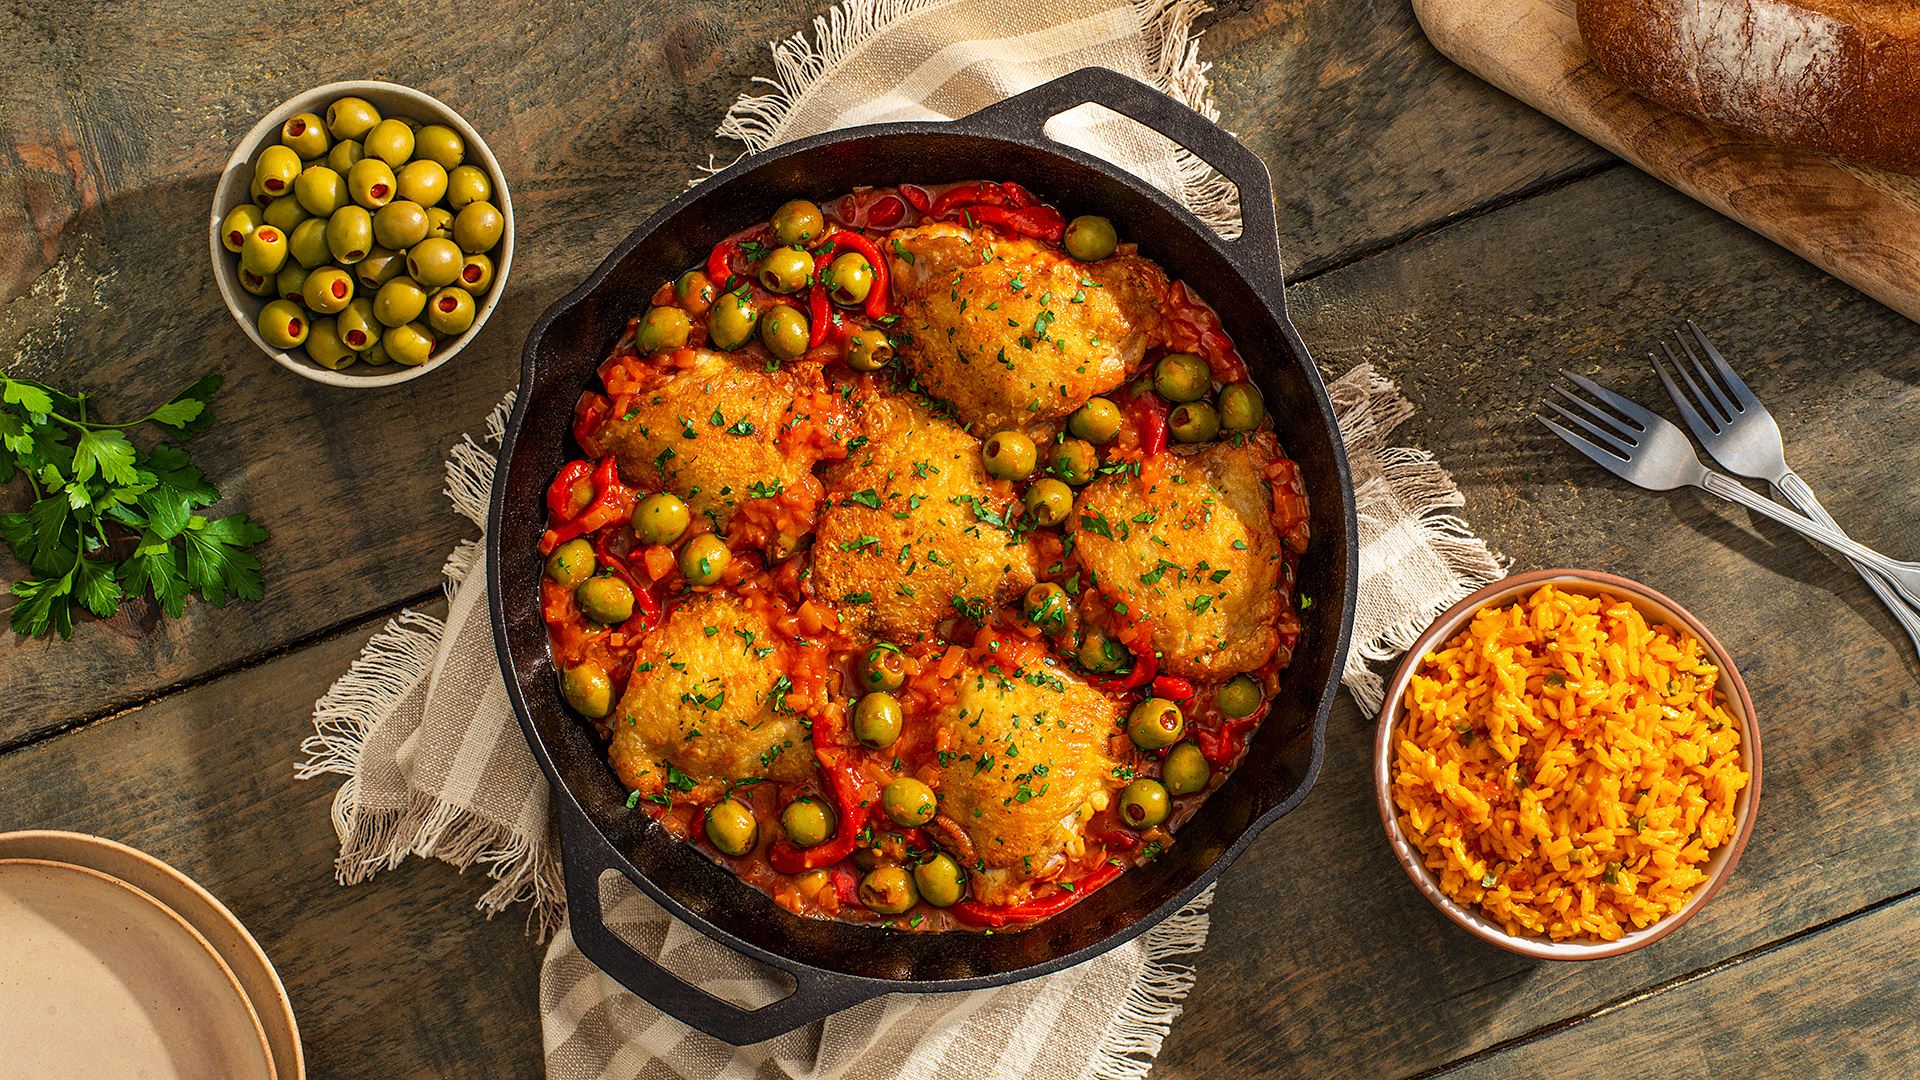 Baked Chicken with Spanish Olives